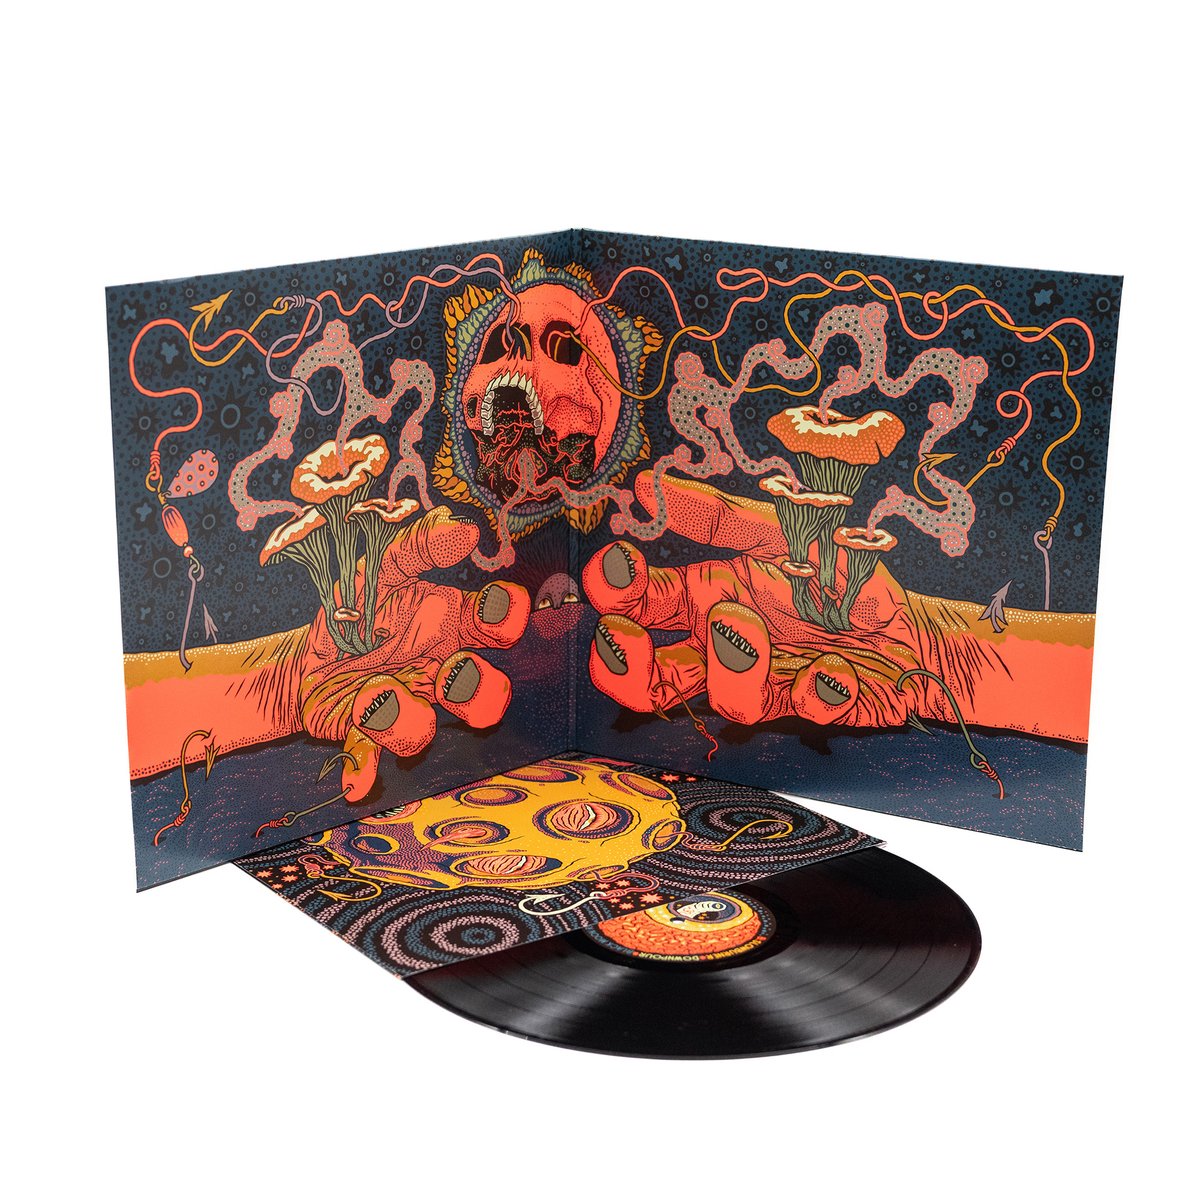 This is the classic black vinyl edition of Swedish psych doomers Domkraft's fourth album, 'Sonic Moons', available now in our shop: lnk.spkr.media/sonic-moons